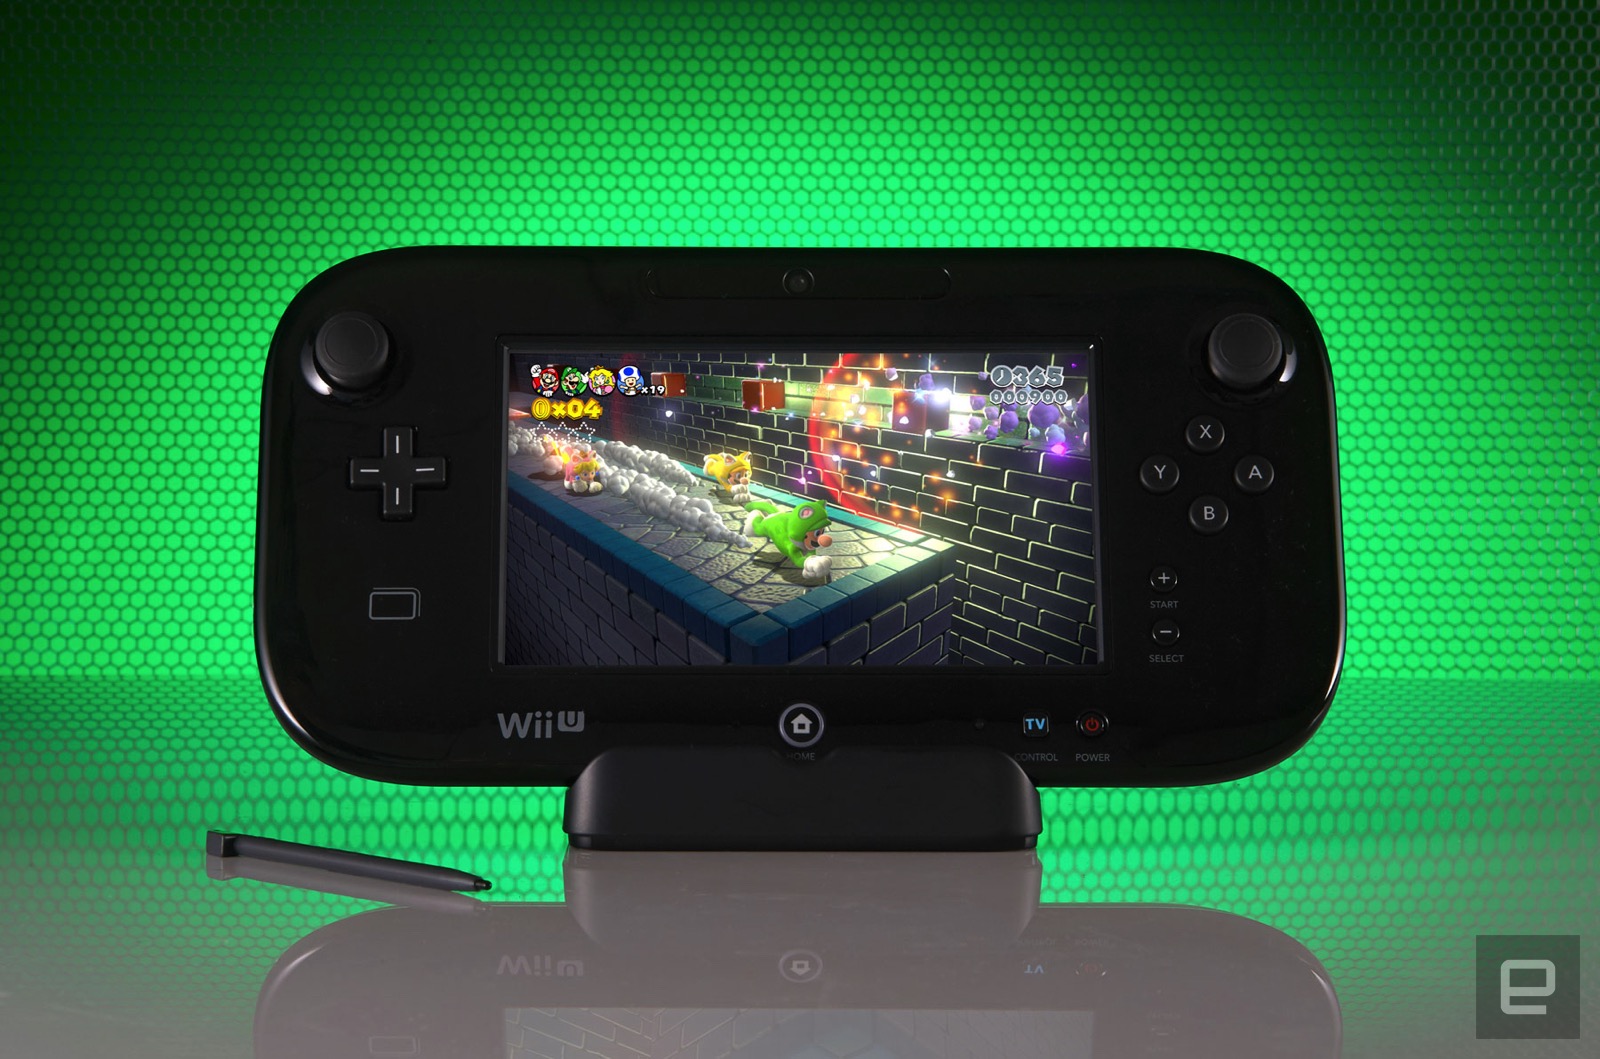 Tirannie Informeer vreugde The Wii U revisited: Looking back on a forward-thinking console | Engadget